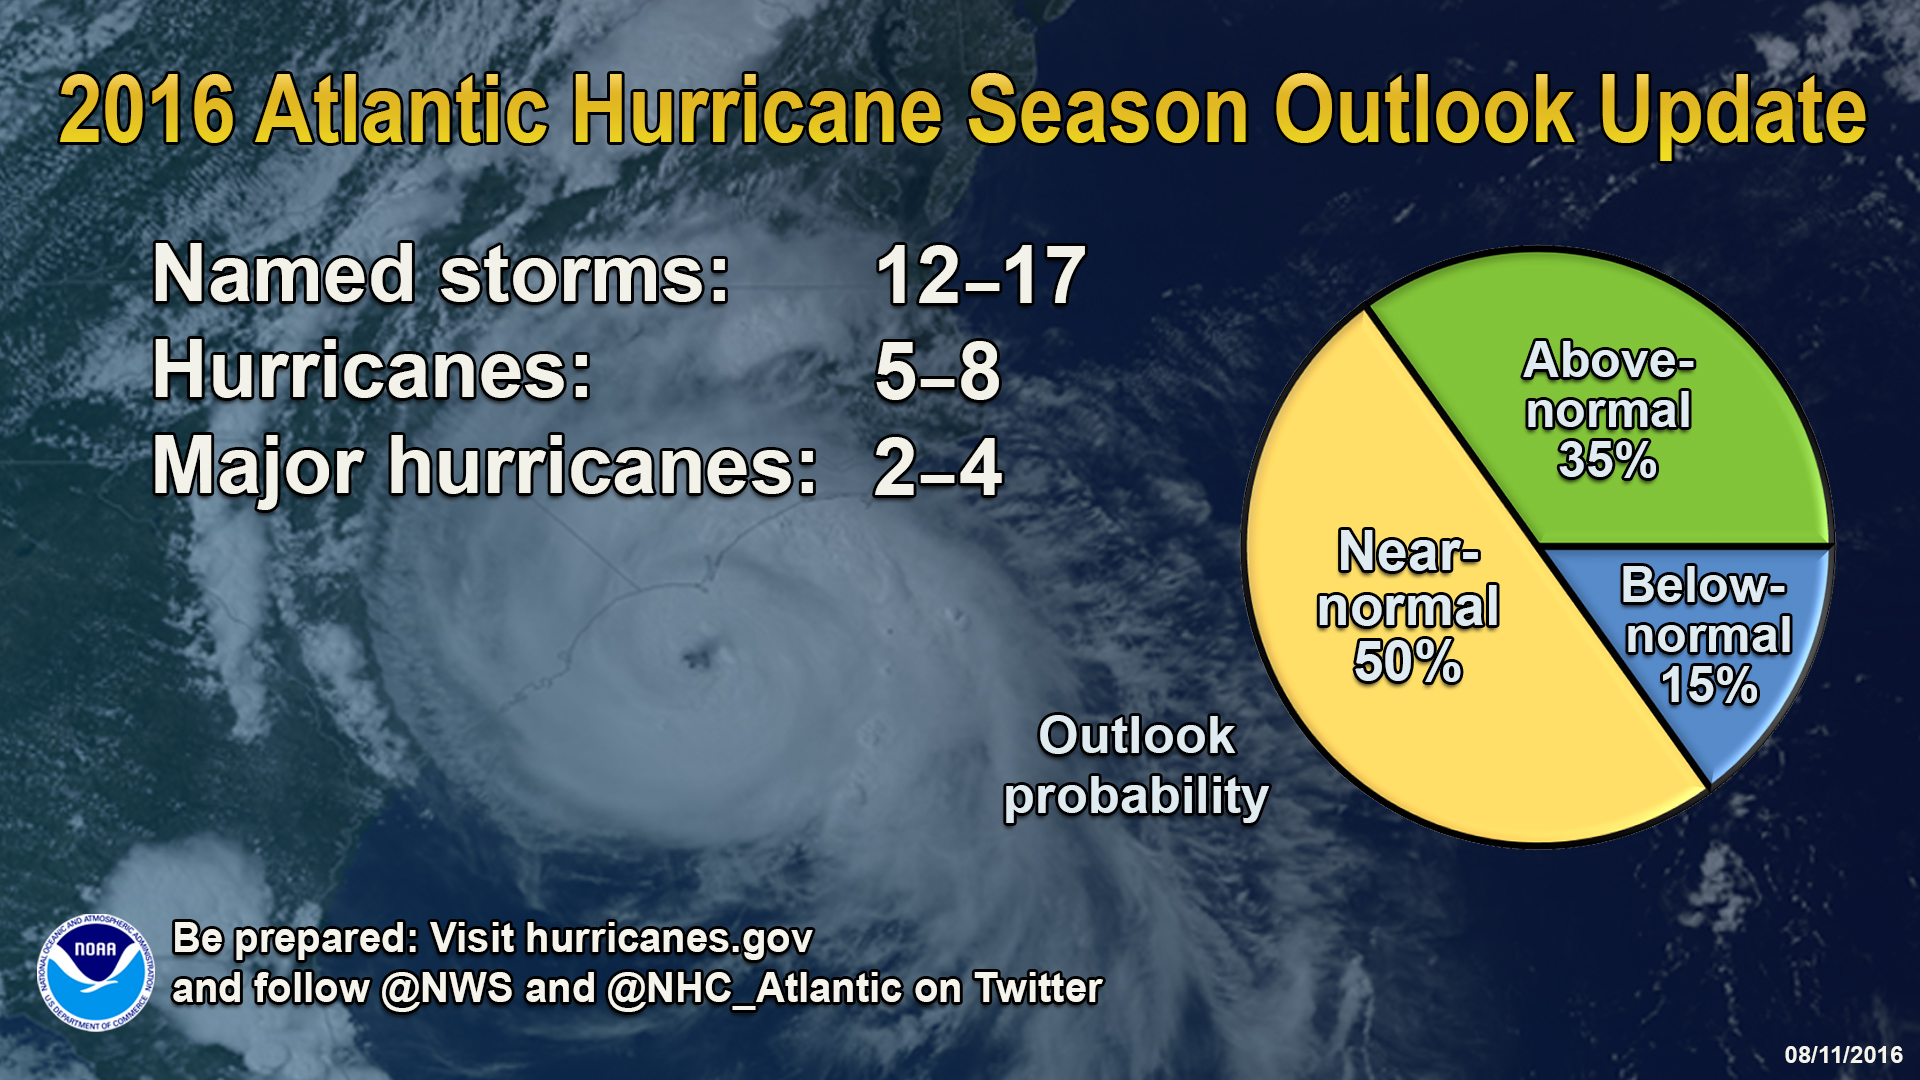 In it's 2016 Atlantic Hurricane Season Outlook Update, NOAA's National Weather Service indicates there is a 70 percent chance of 12 to 17 named storms.